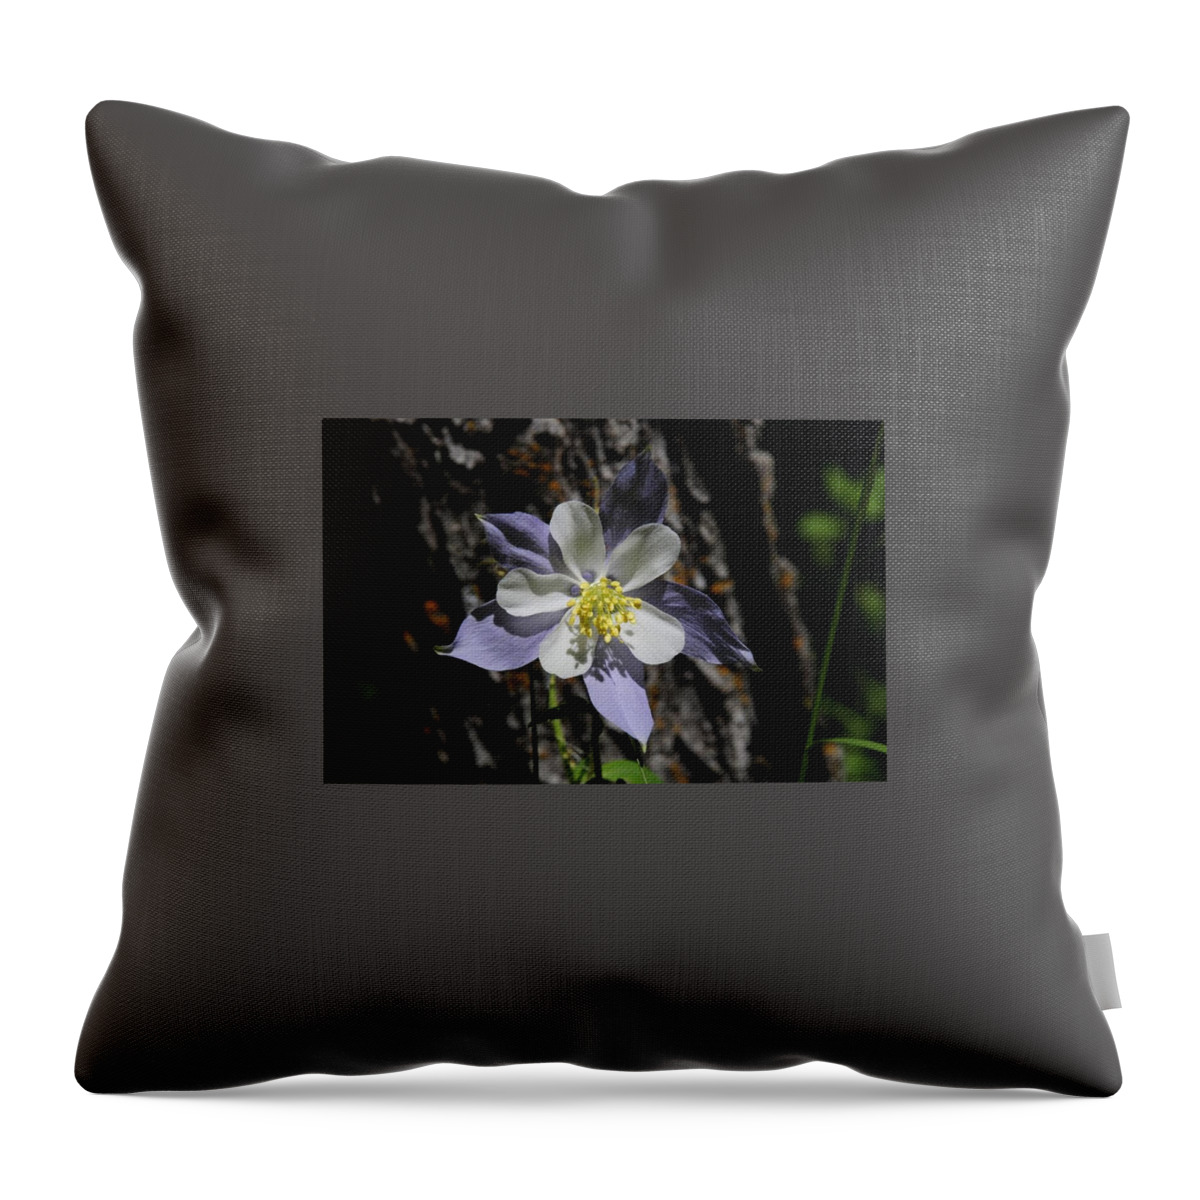  Throw Pillow featuring the photograph Columbine by Susie Rieple